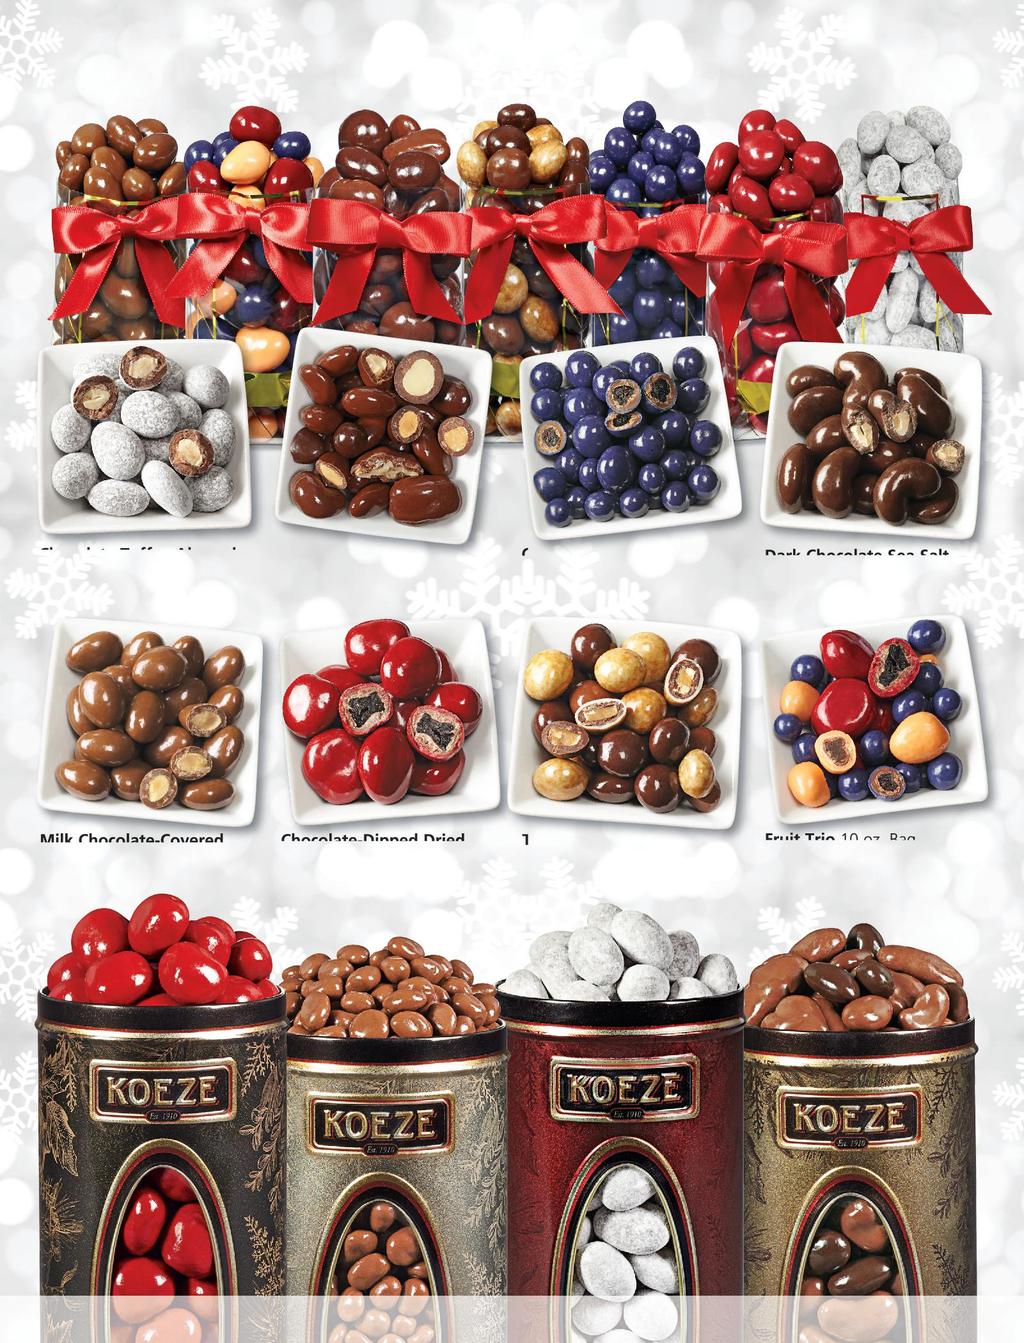 CLASSIC CONFECTIONS You are sure to find some favorites among our festive bags of chocolate-dipped dried fruits, nuts, and toffee confections.